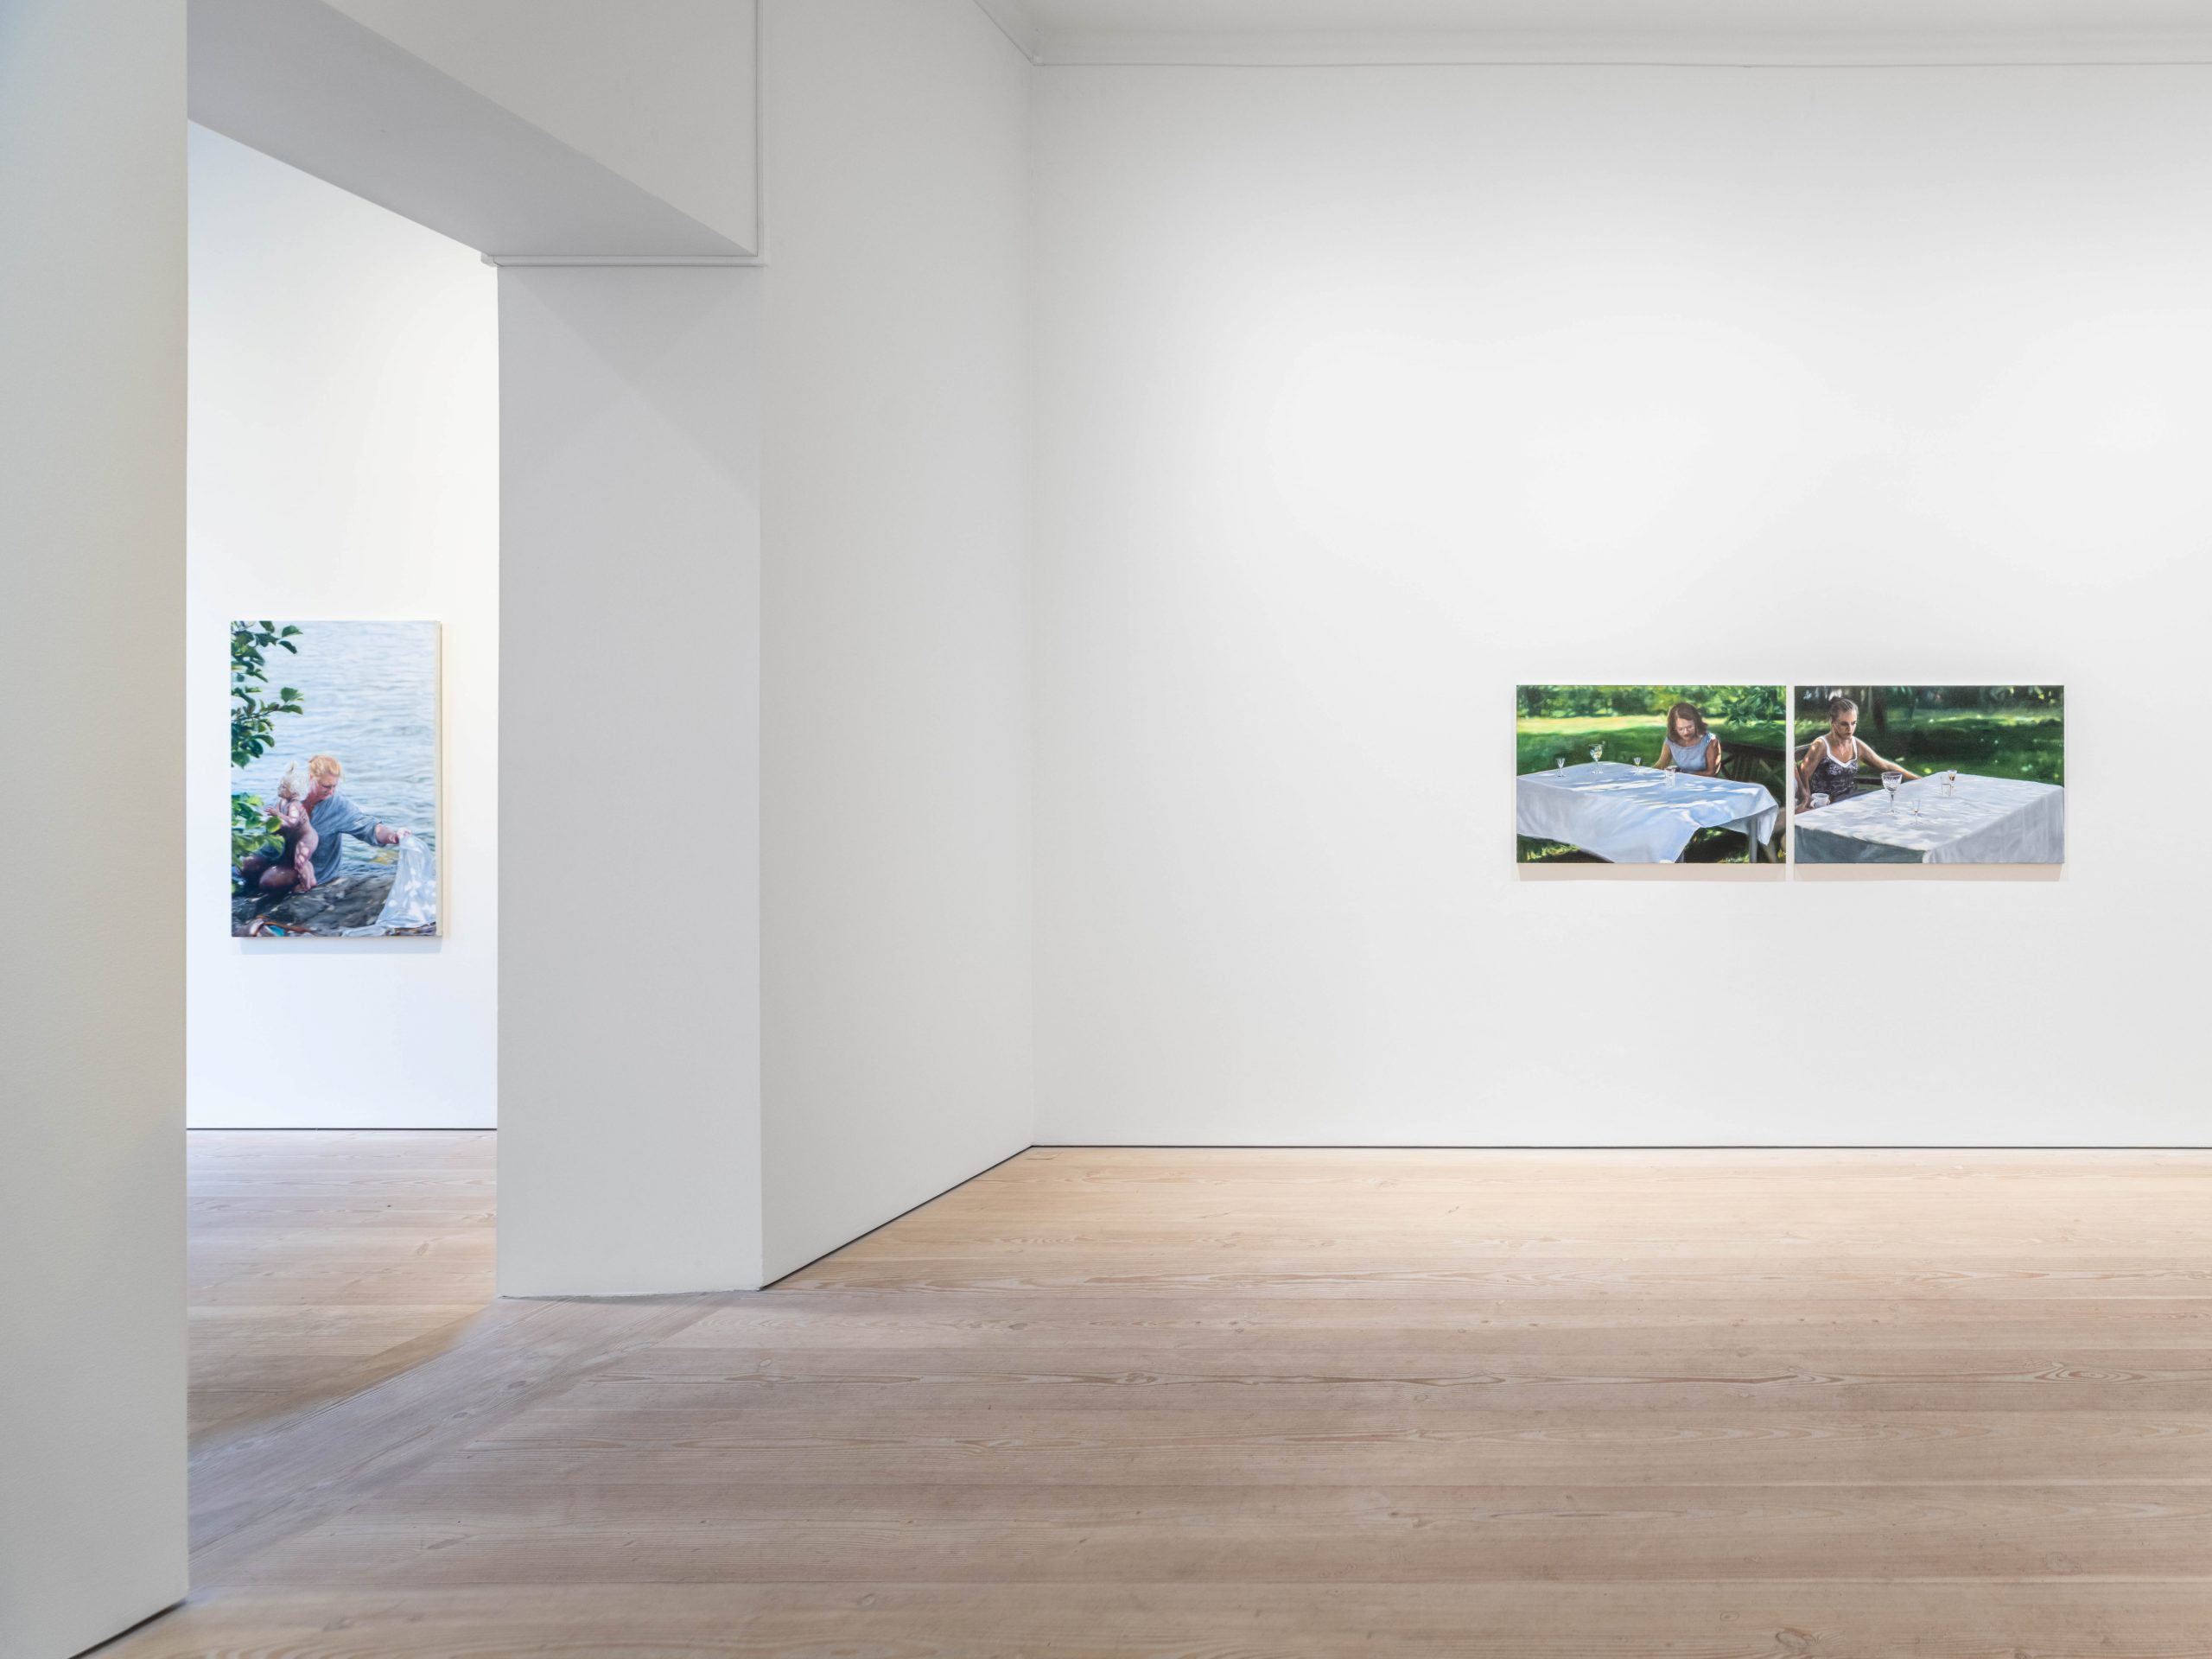 Installation view: "The M Painting", 2023. Oil on canvas, 125 x 81 cm. Au coin du jardin I & II, 2023. 66 x 100 cm x 2 (diptyche)
